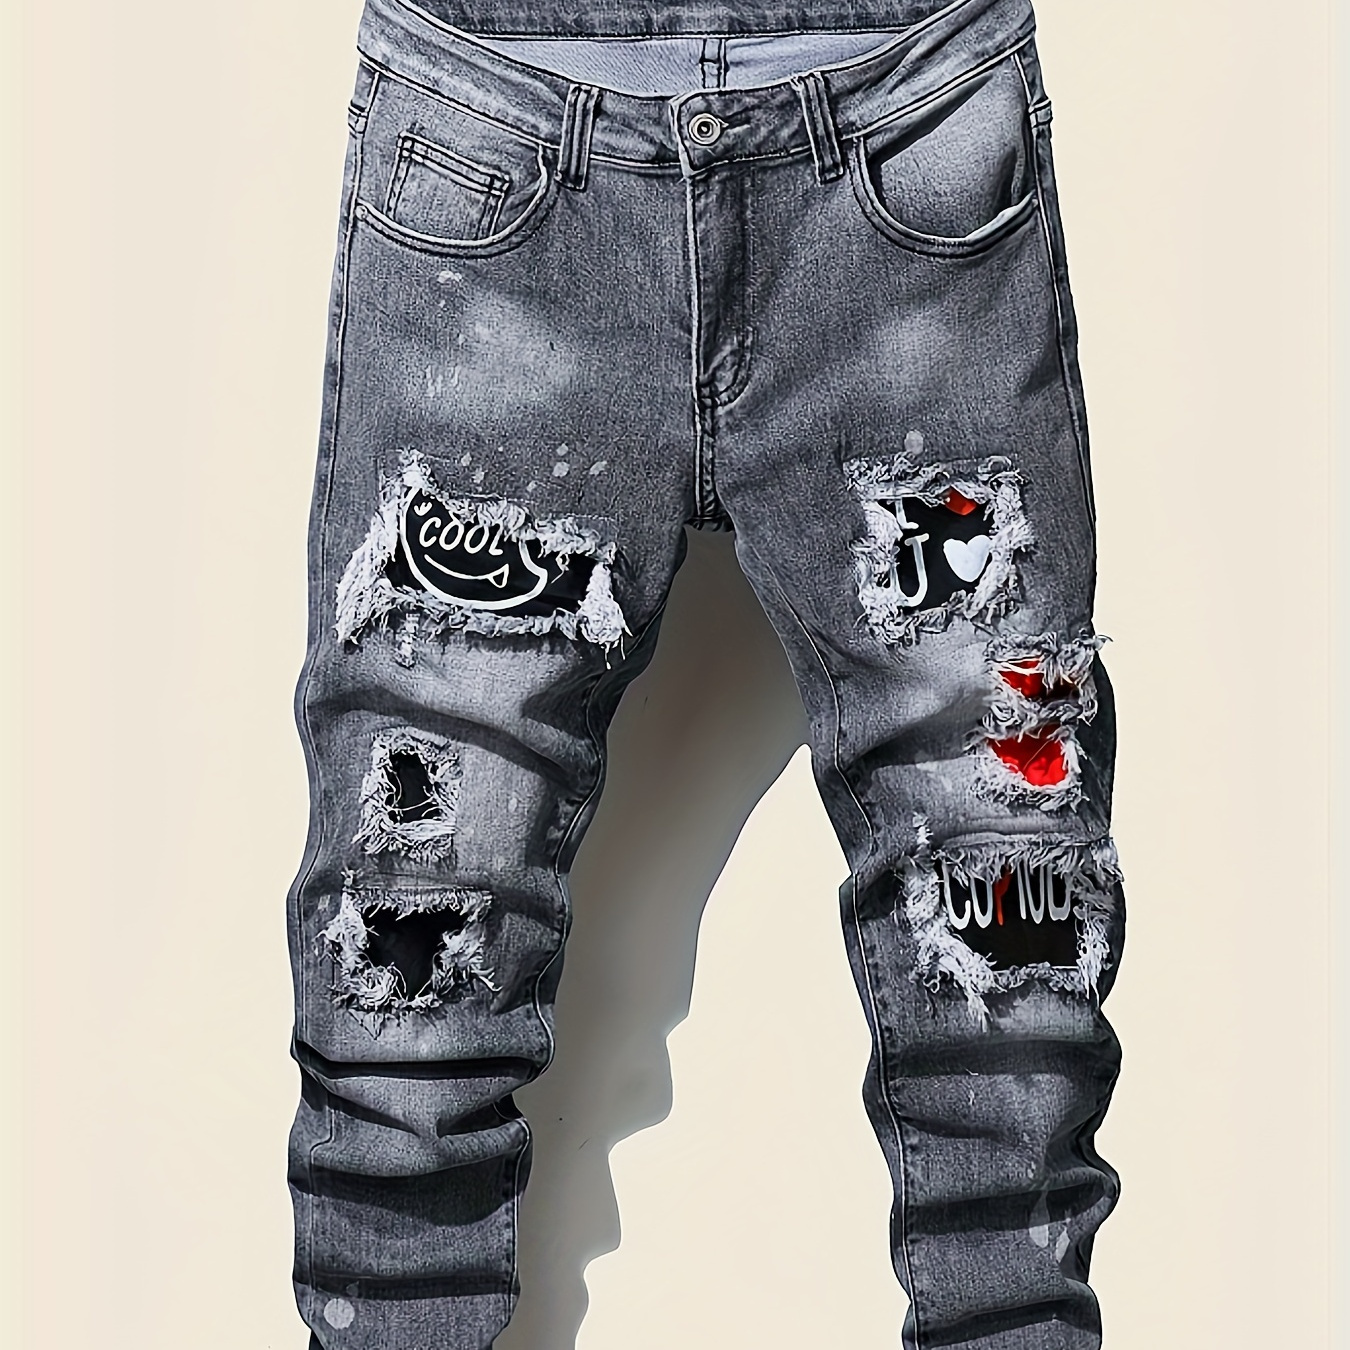 

Slim Fit Patchwork Jeans, Men's Casual Street Style Distressed Stretch Denim Pants